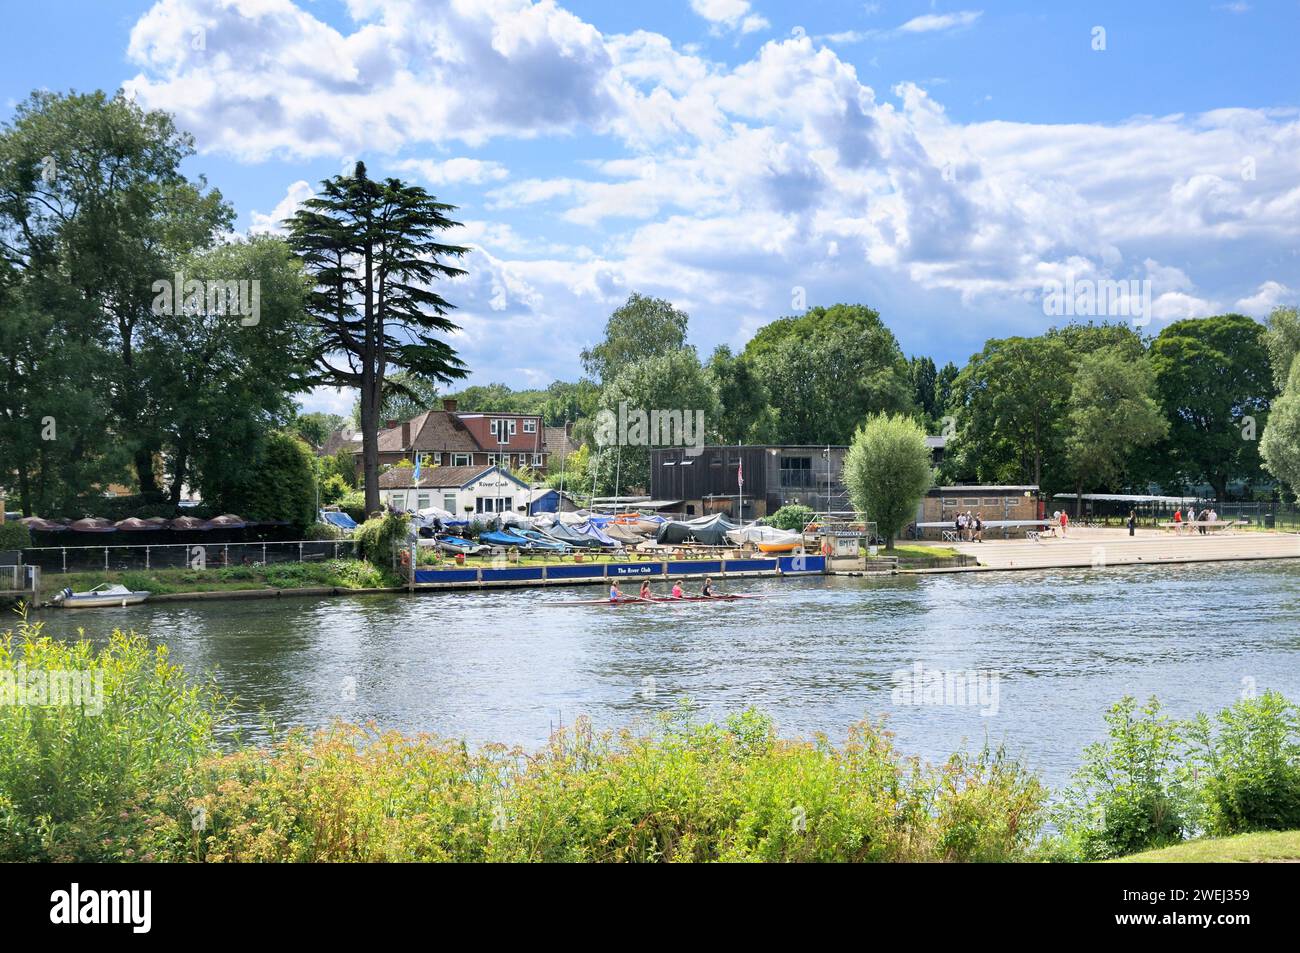 Four young women in a rowing boat on the River Thames in summer outside The River Club between Hampton Court and Kingston, England, UK Stock Photo